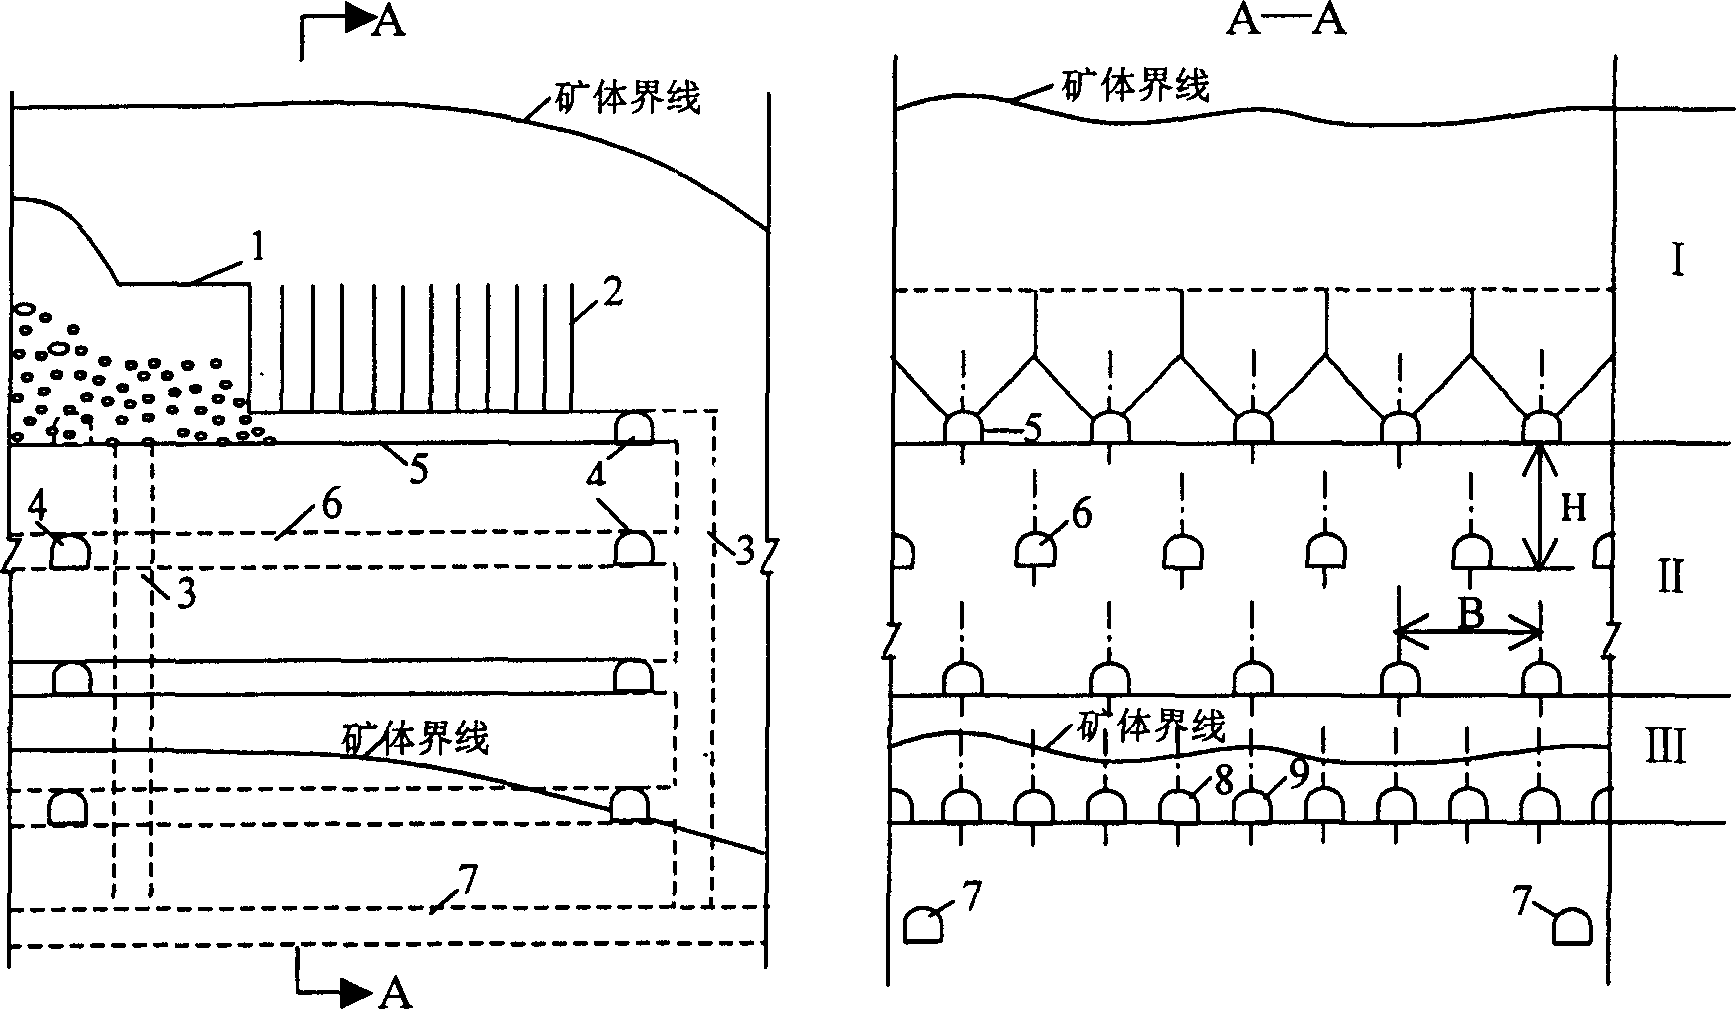 Improved sublevel caving method without bottom column